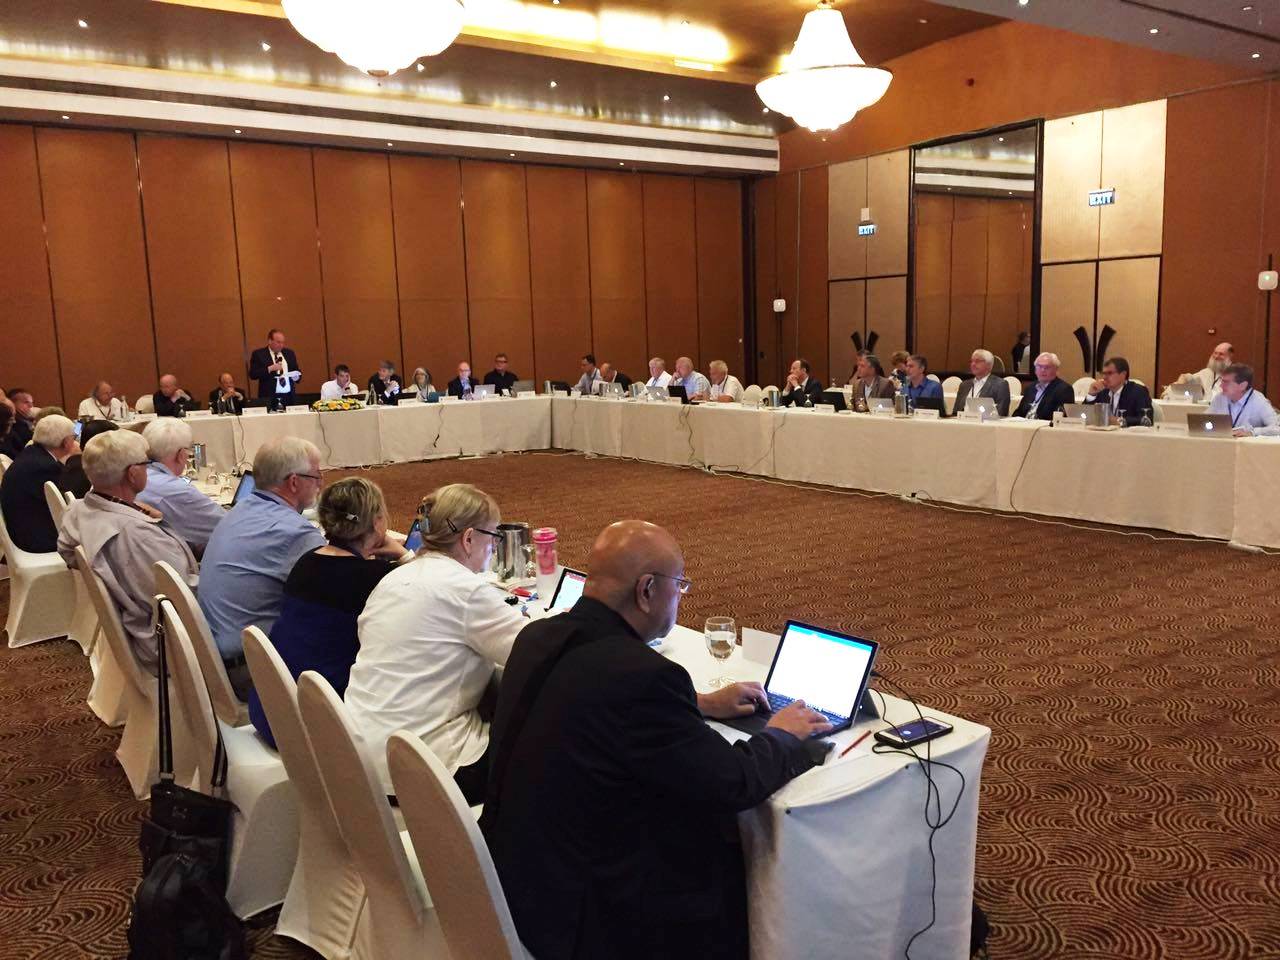 IFIP-Global-General-Assembly-held-in-Sri-Lanka-with-Nearly-50-countries